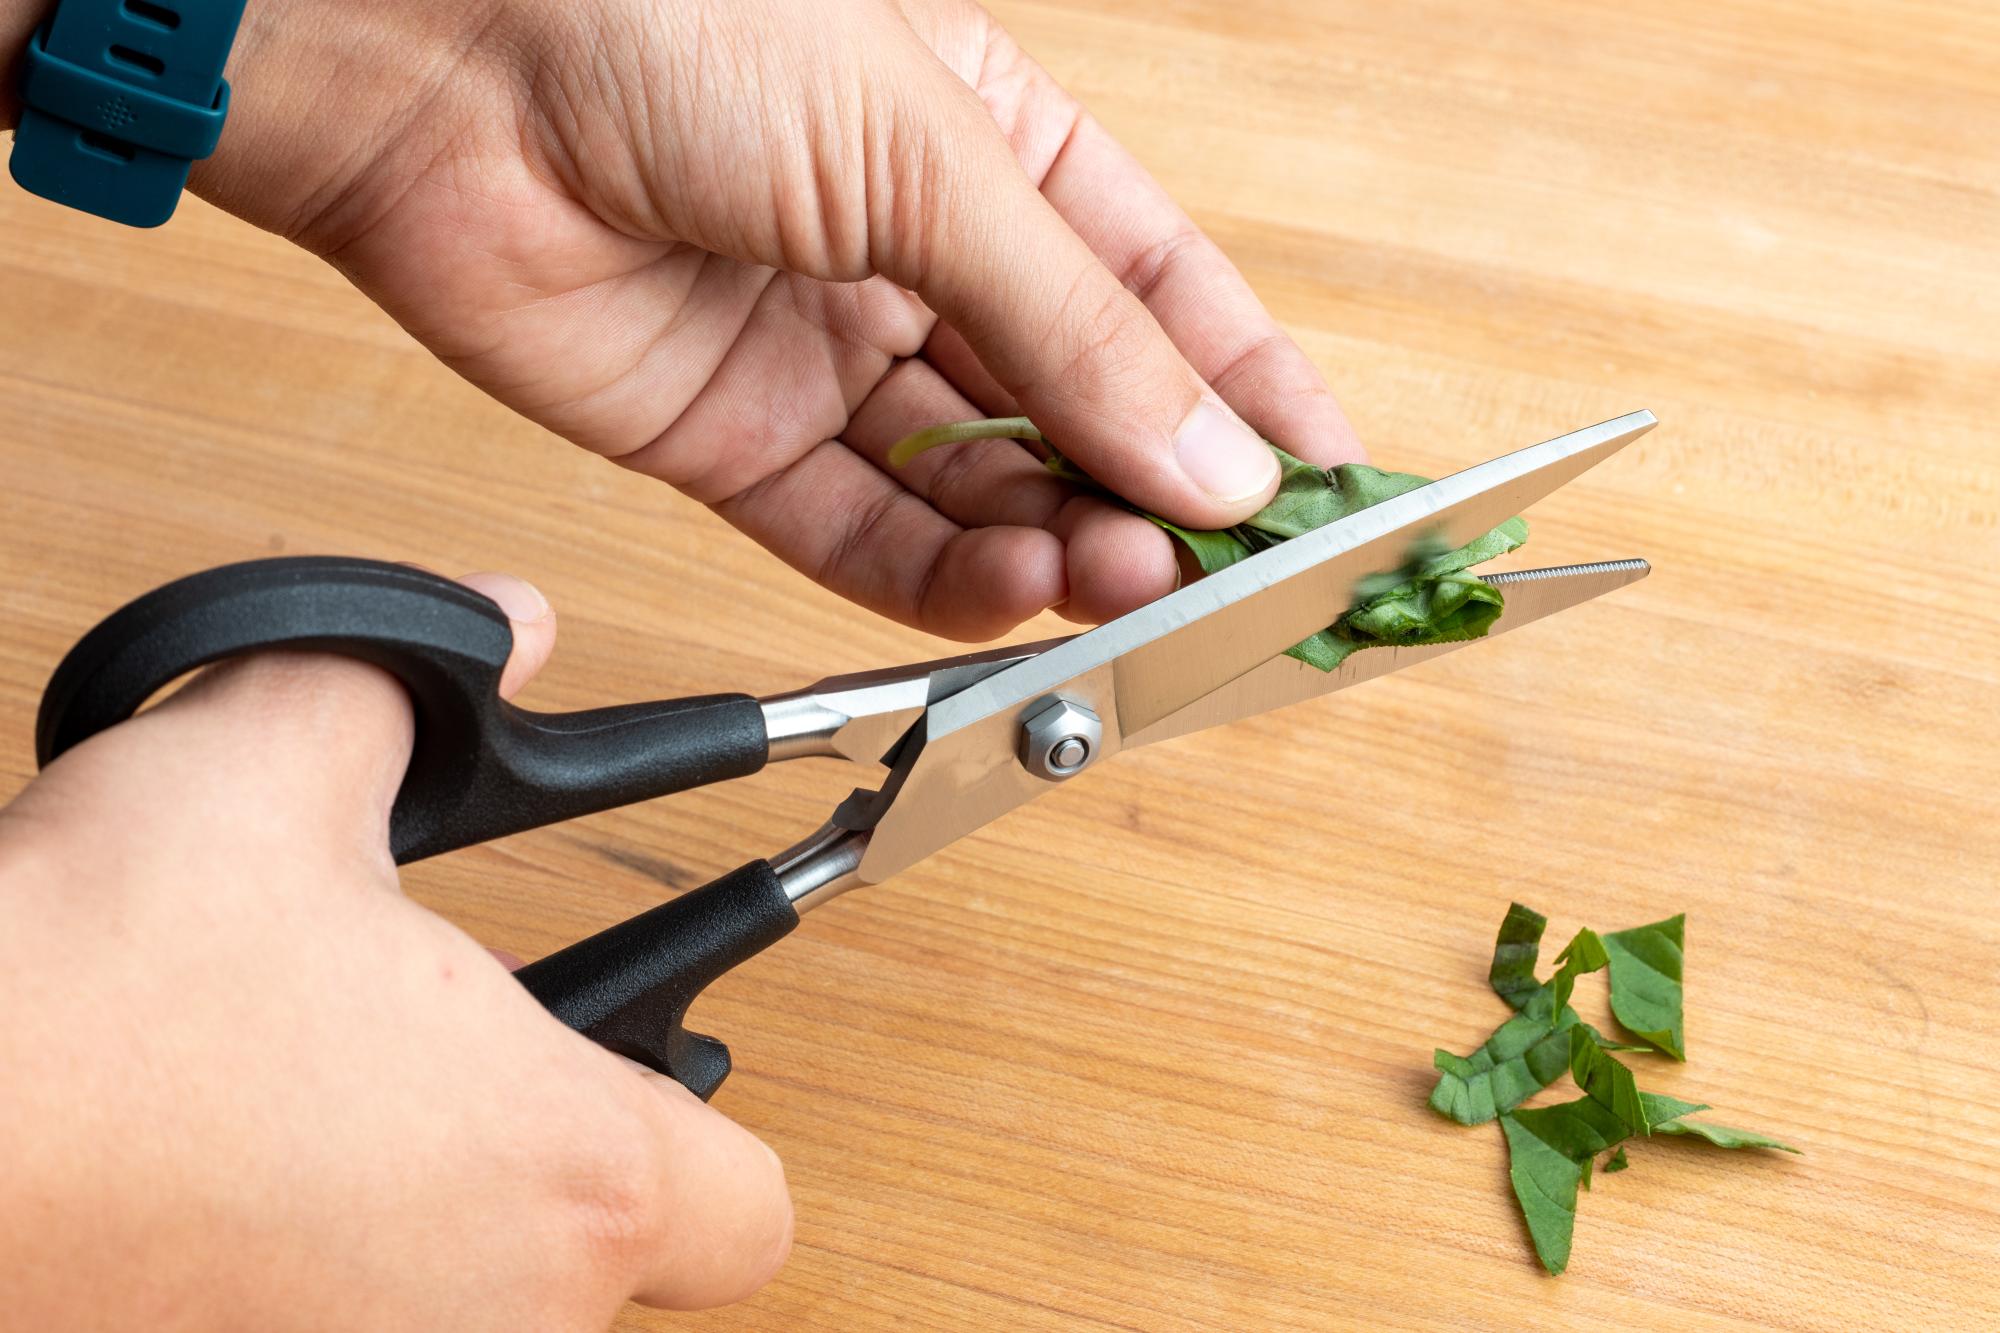 Using the Super Shears to snip the basil into strips.